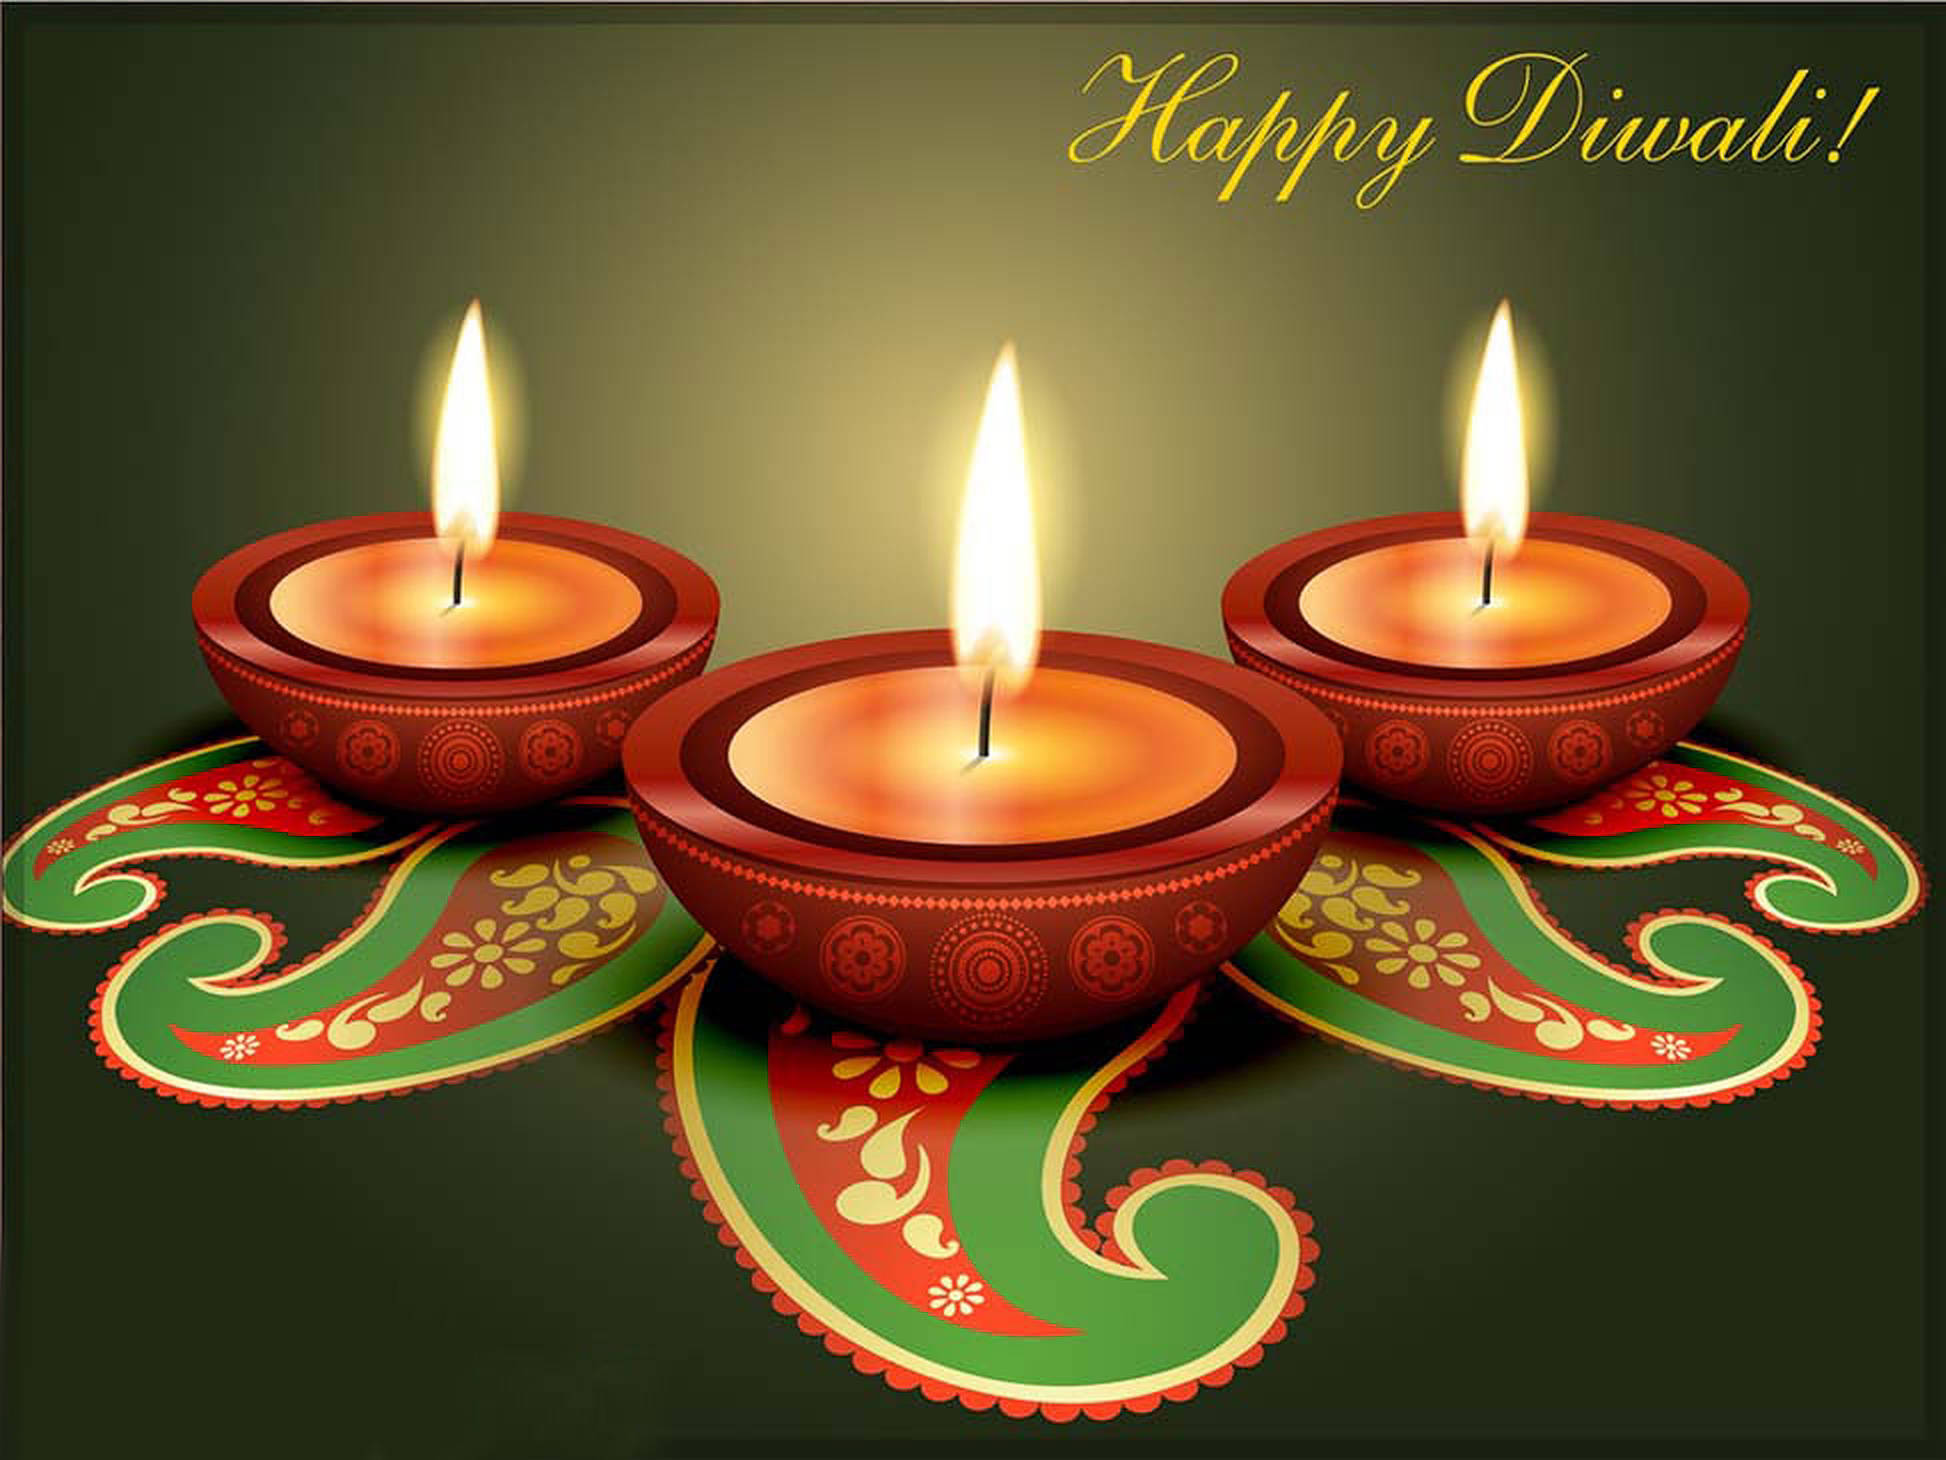 Fascinating Diwali Image Shows The Diya Lights In The Center With A Lovely Design Below Against A Green Backdrop.